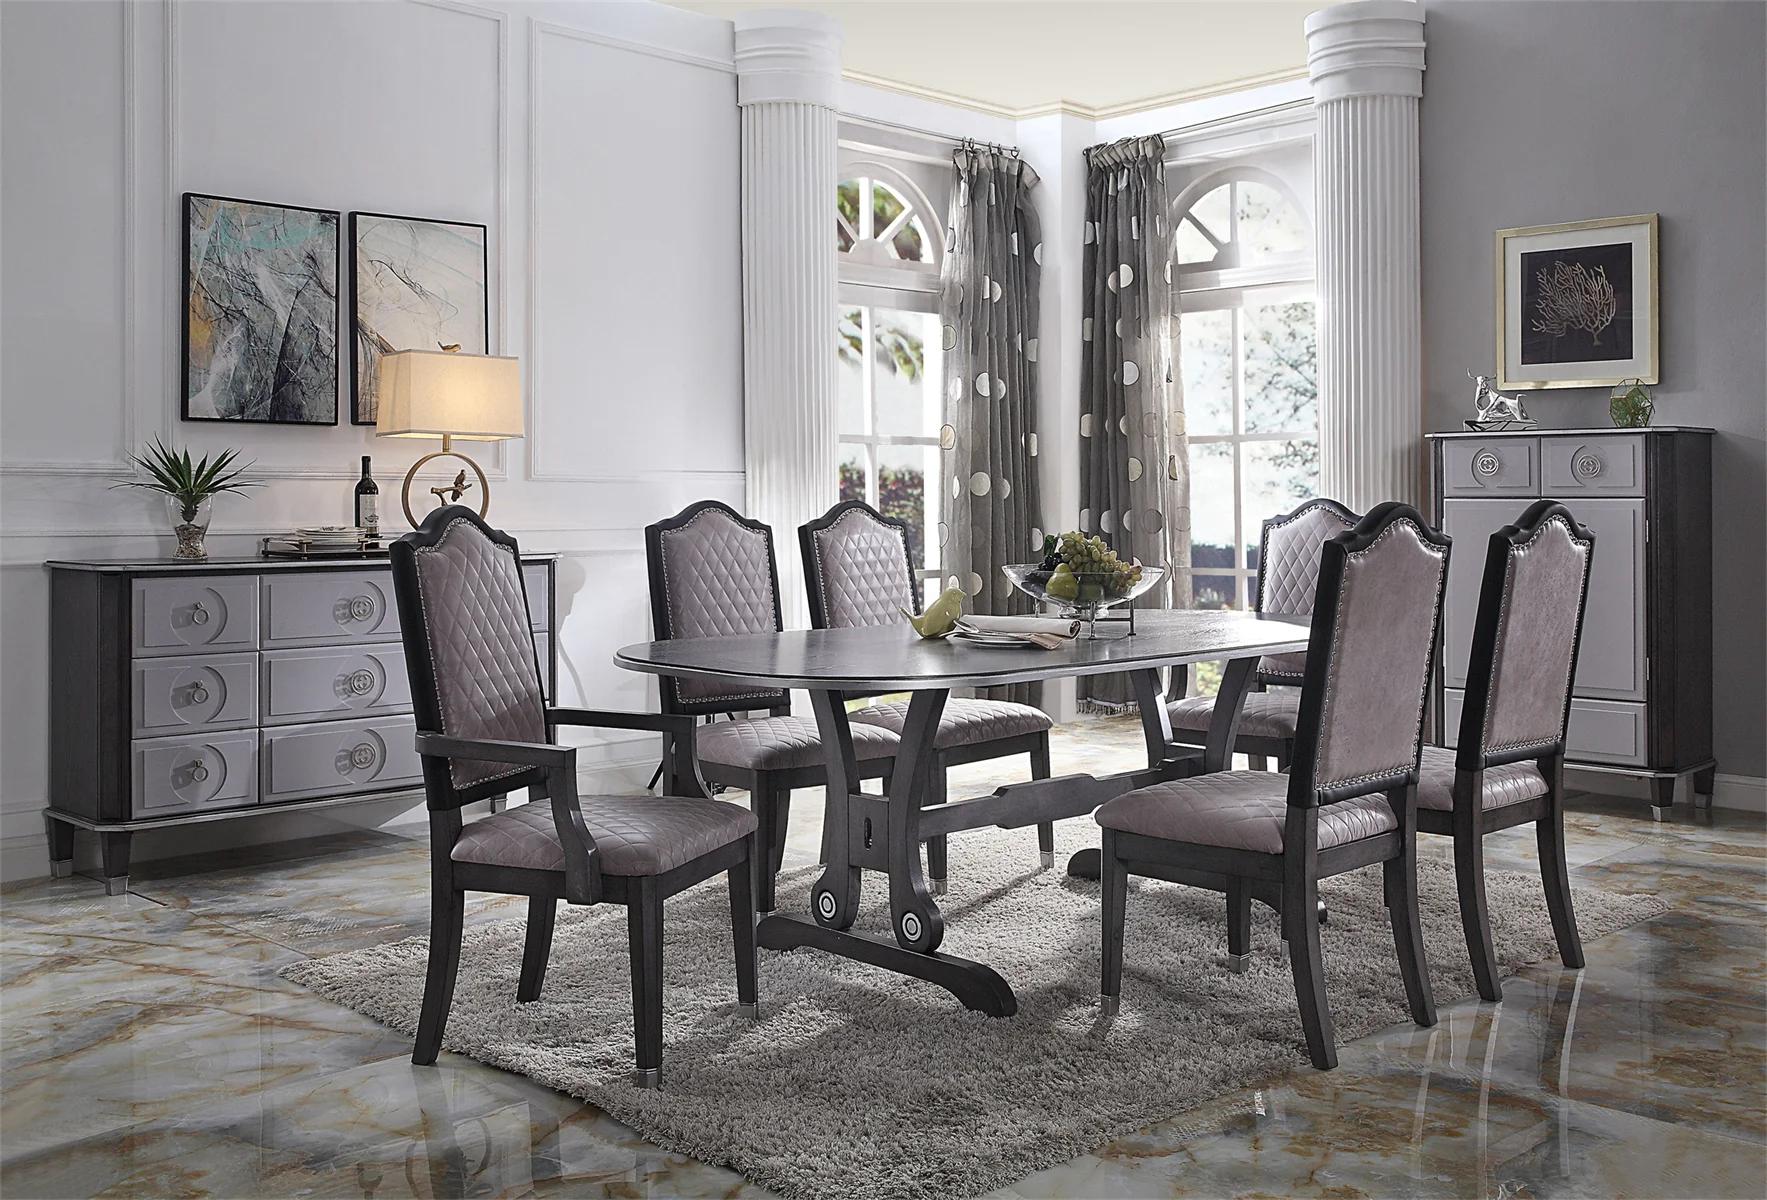 Transitional Dining Room Set House Beatrice 68810-7pcs in Charcoal Fabric